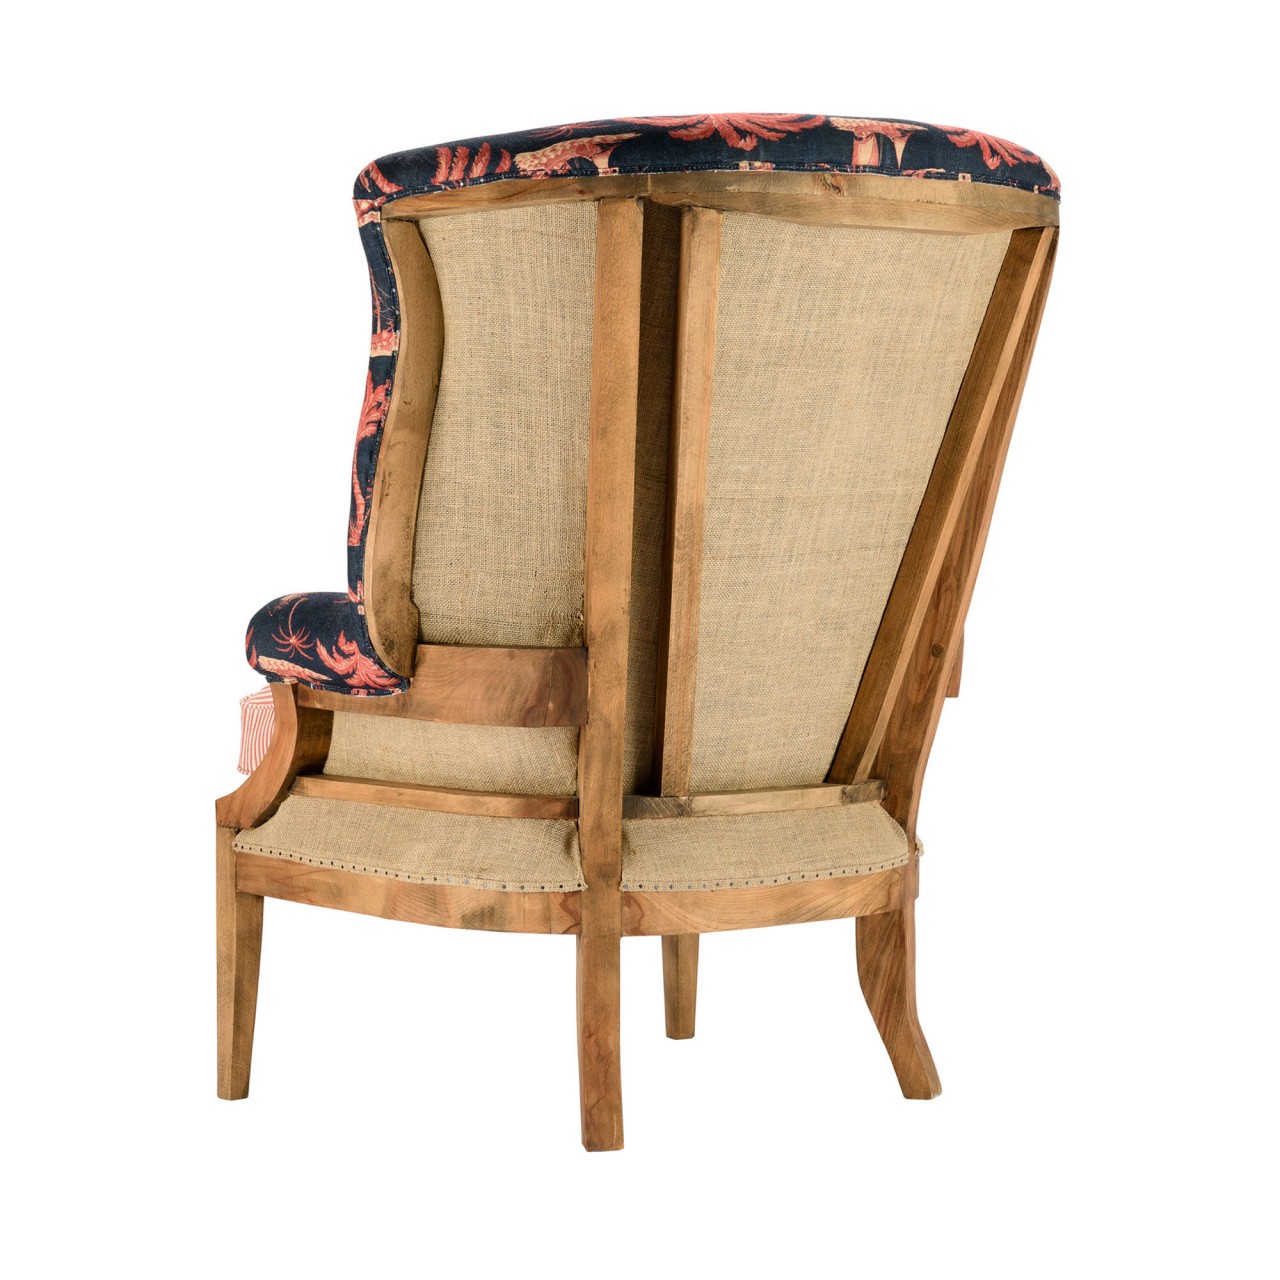 WILLIAM DECONSTRUCTED WING CHAIR - AEGEAN Indigo Fabric and RHUBARB STRIPE Linen